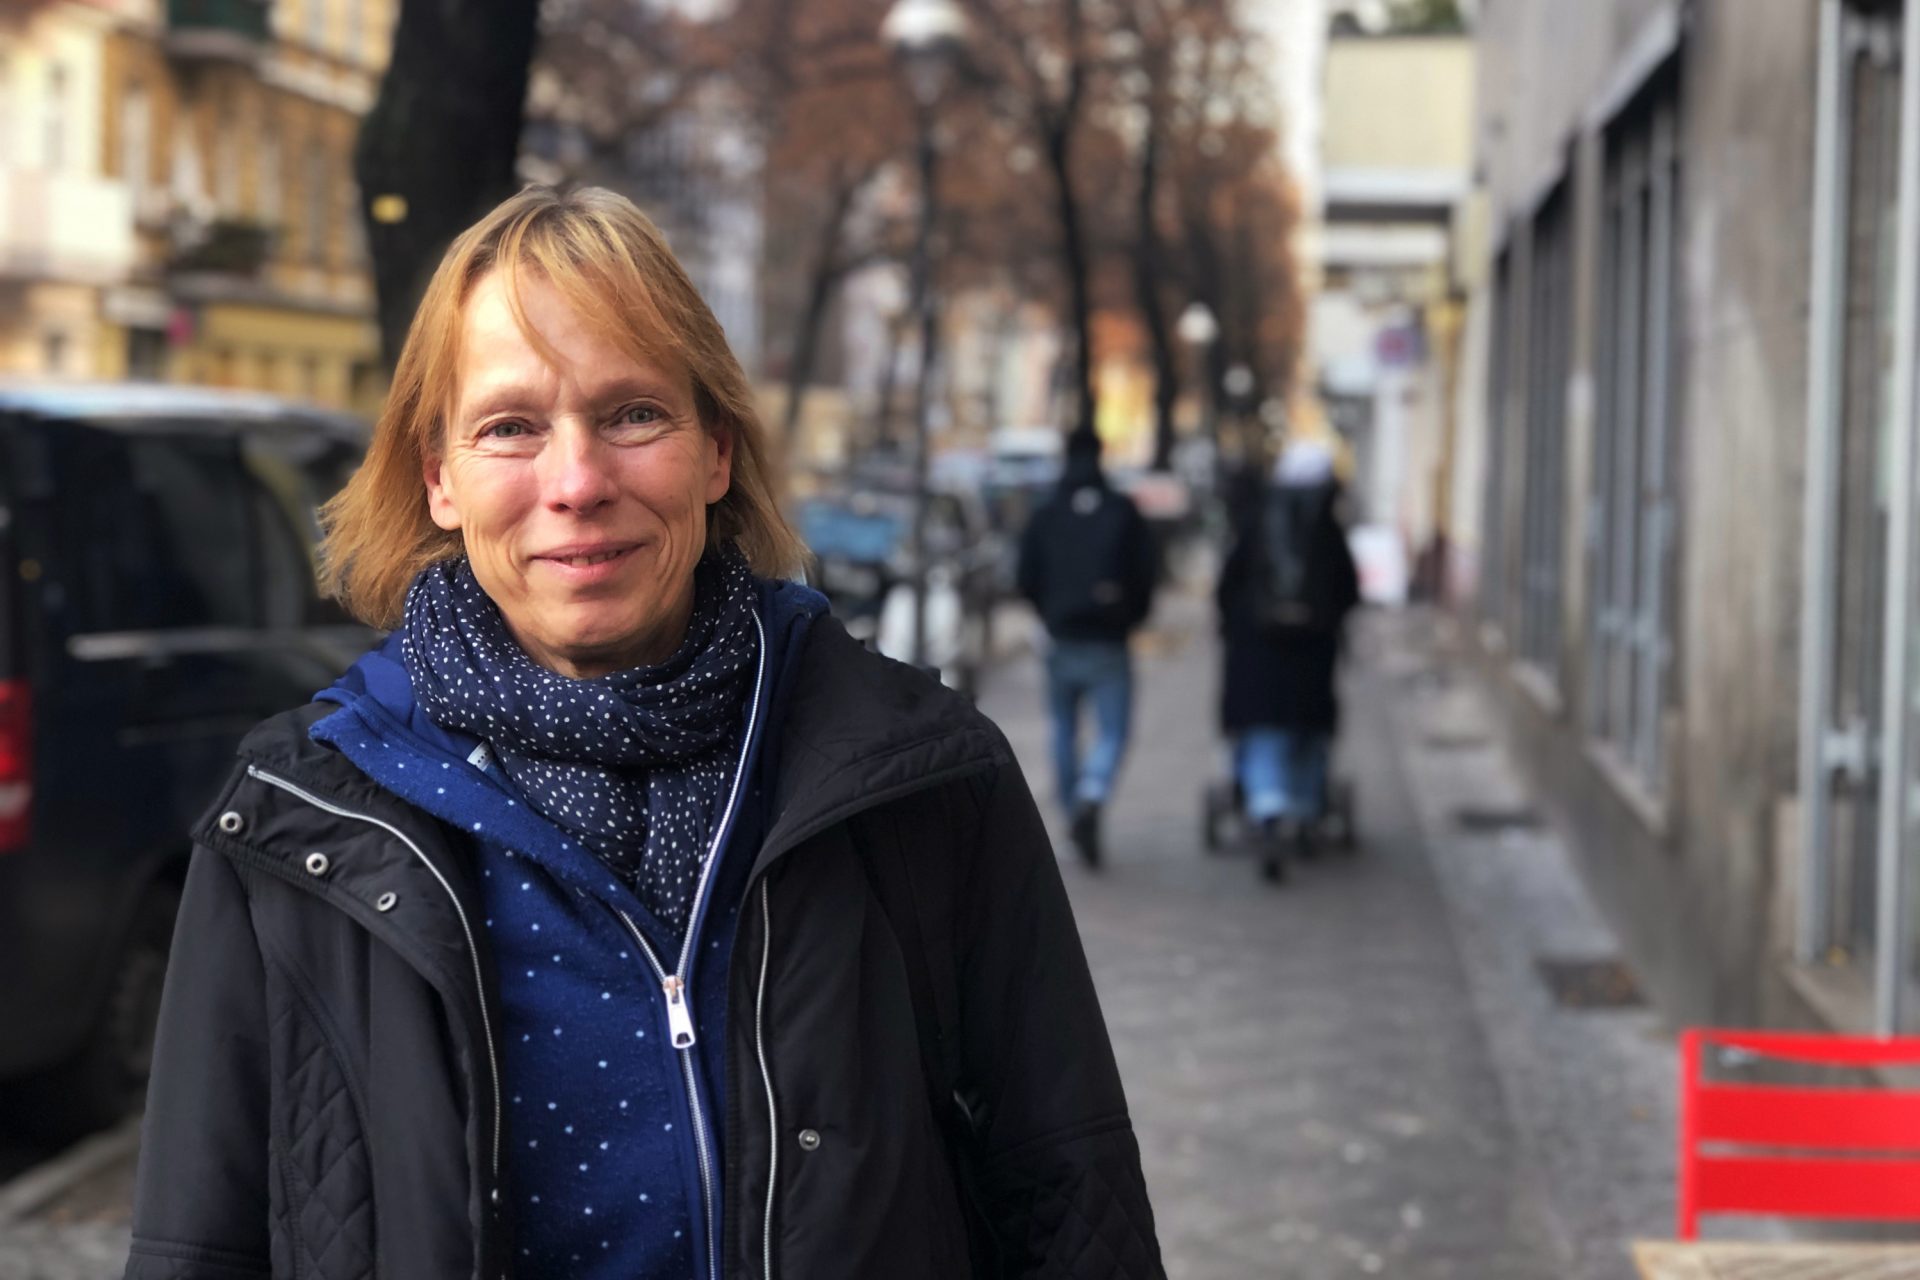 Petra Henkert, manager of a Berlin Santa Claus agency, says the number of Santas she employs in Berlin has dropped precipitously in the past two years.